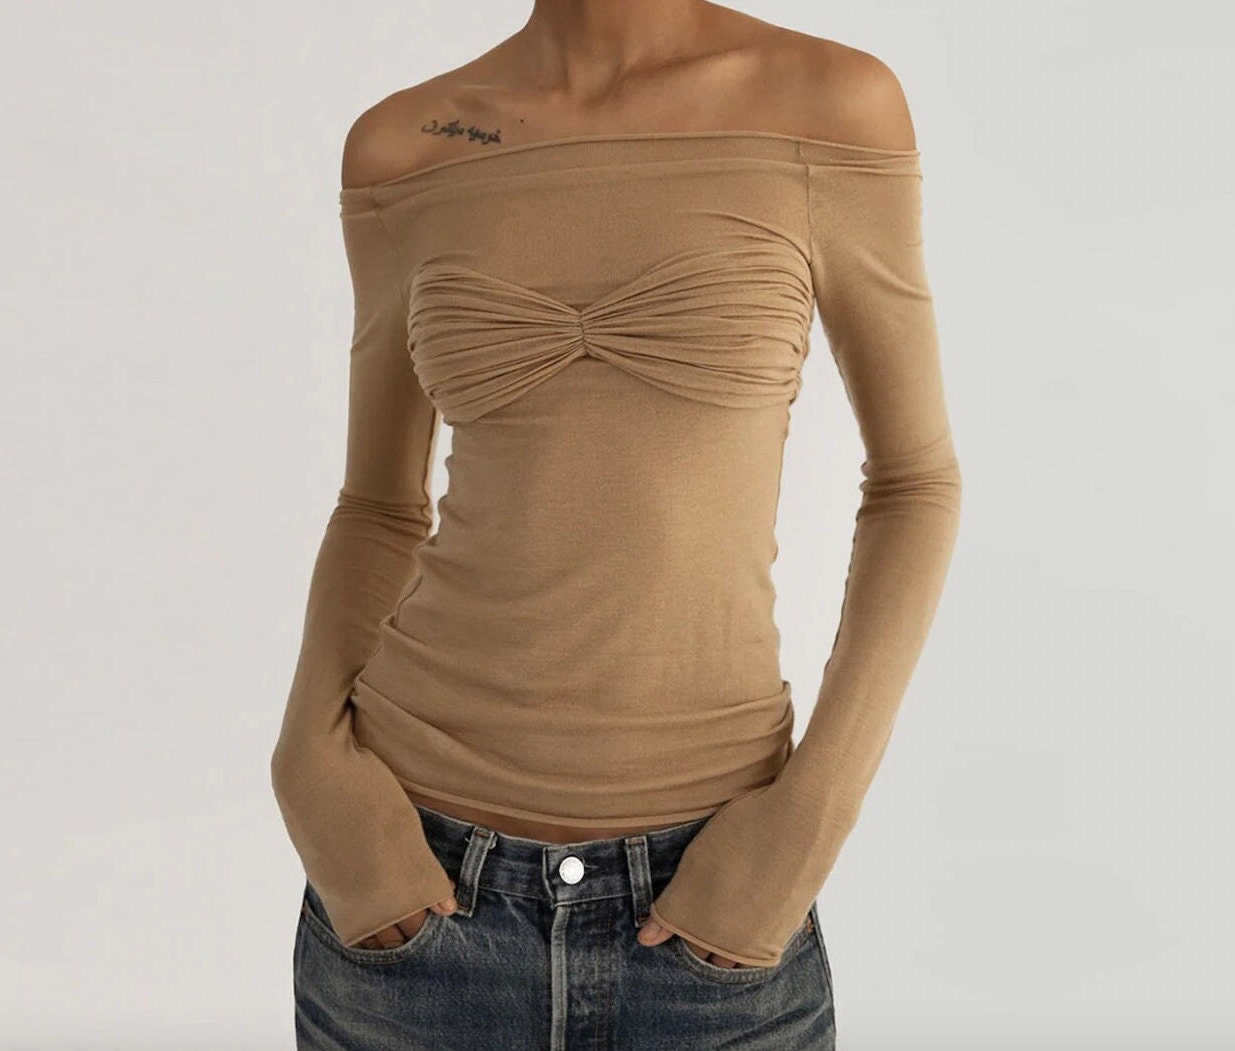 Trendy Y2K Mesh Top for Women - Fashionable and Breathable